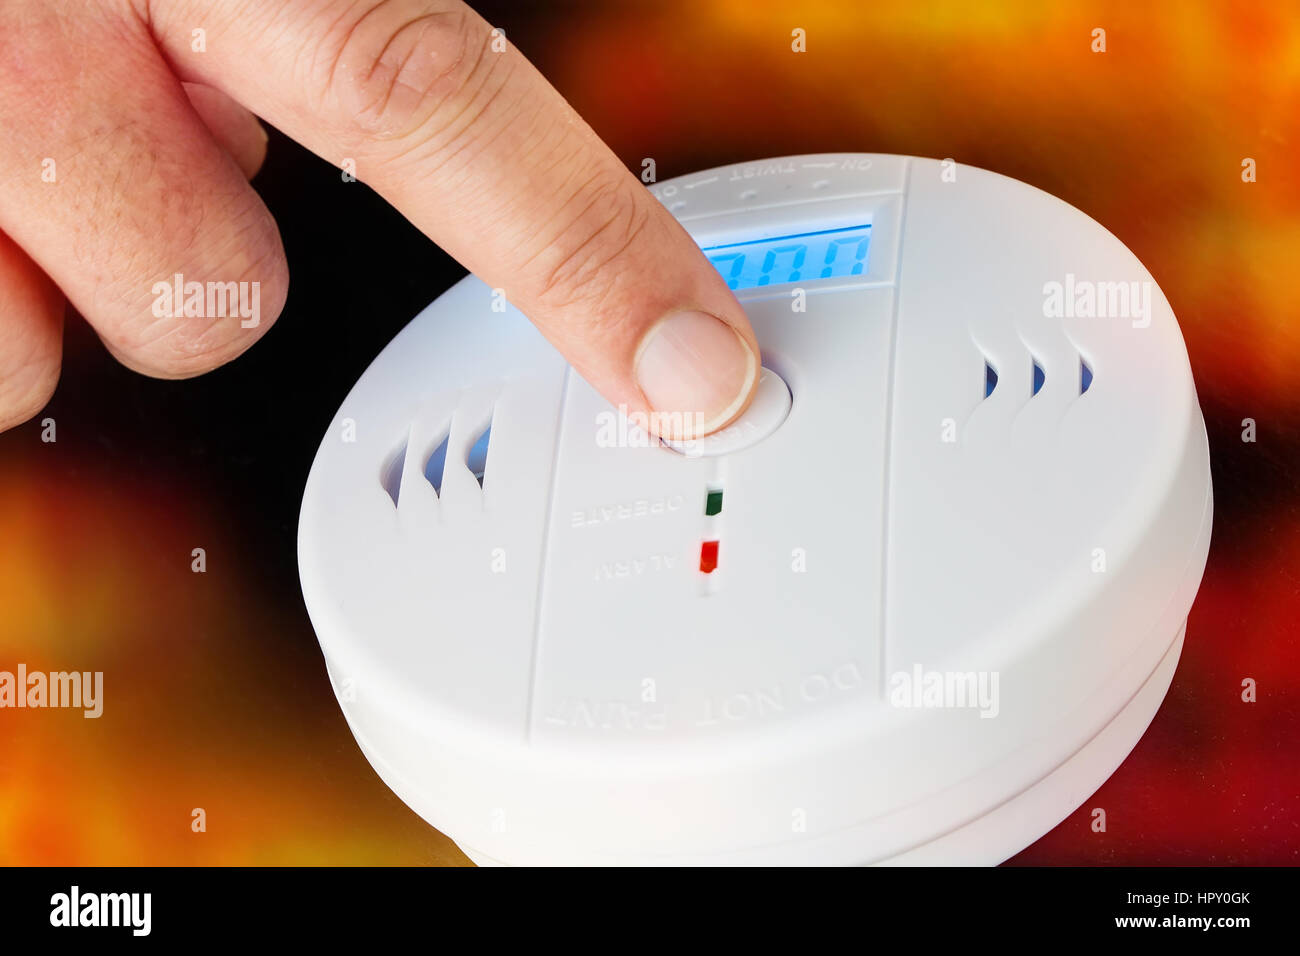 Test of a smoke and fire alarm with carbon monoxide sensor capability Stock Photo